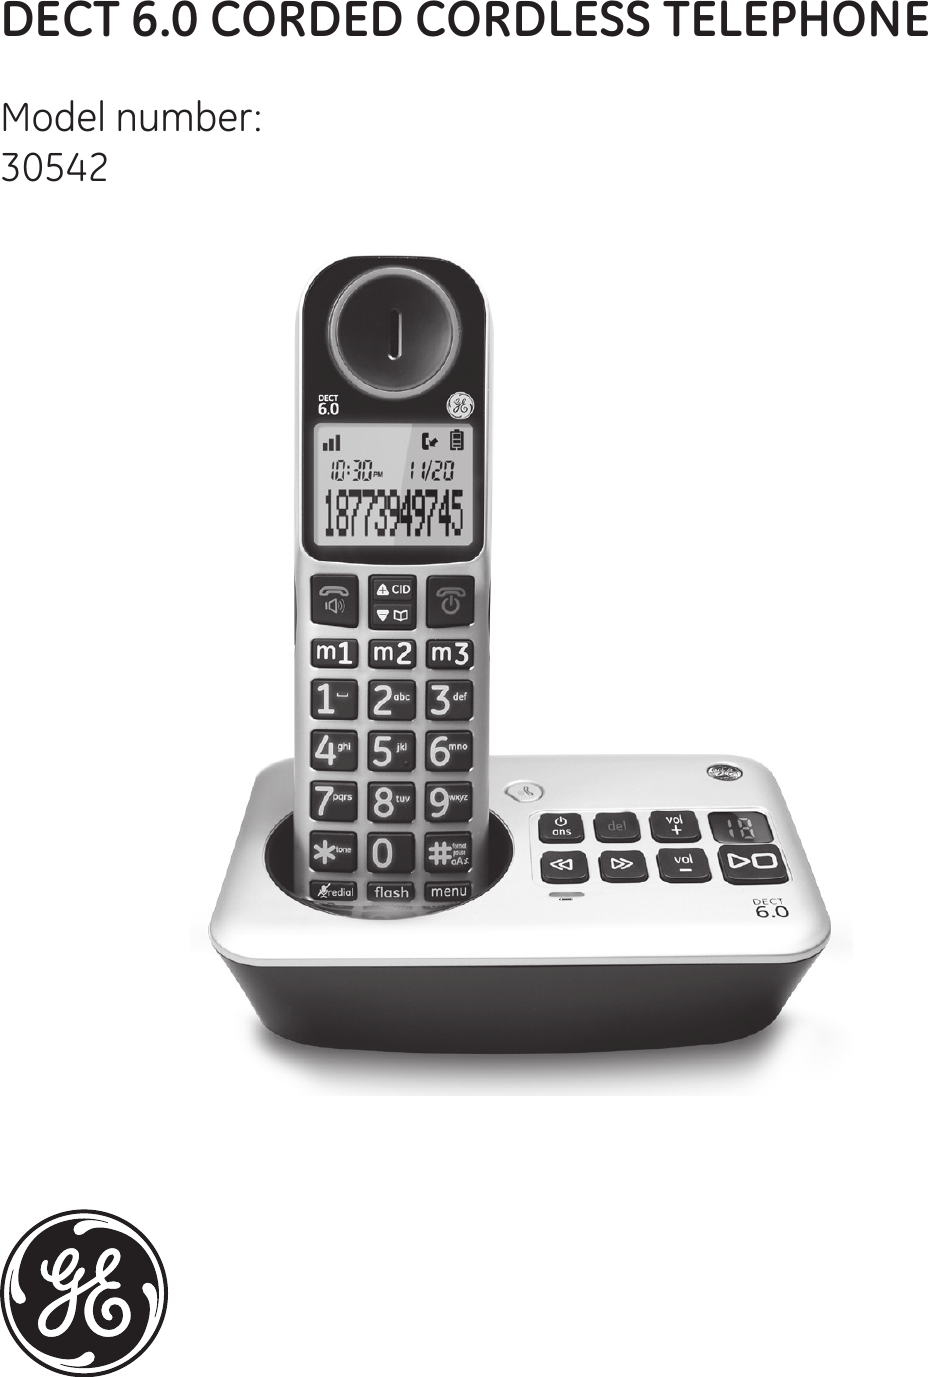 Model number: 30542DECT 6.0 CORDED CORDLESS TELEPHONE